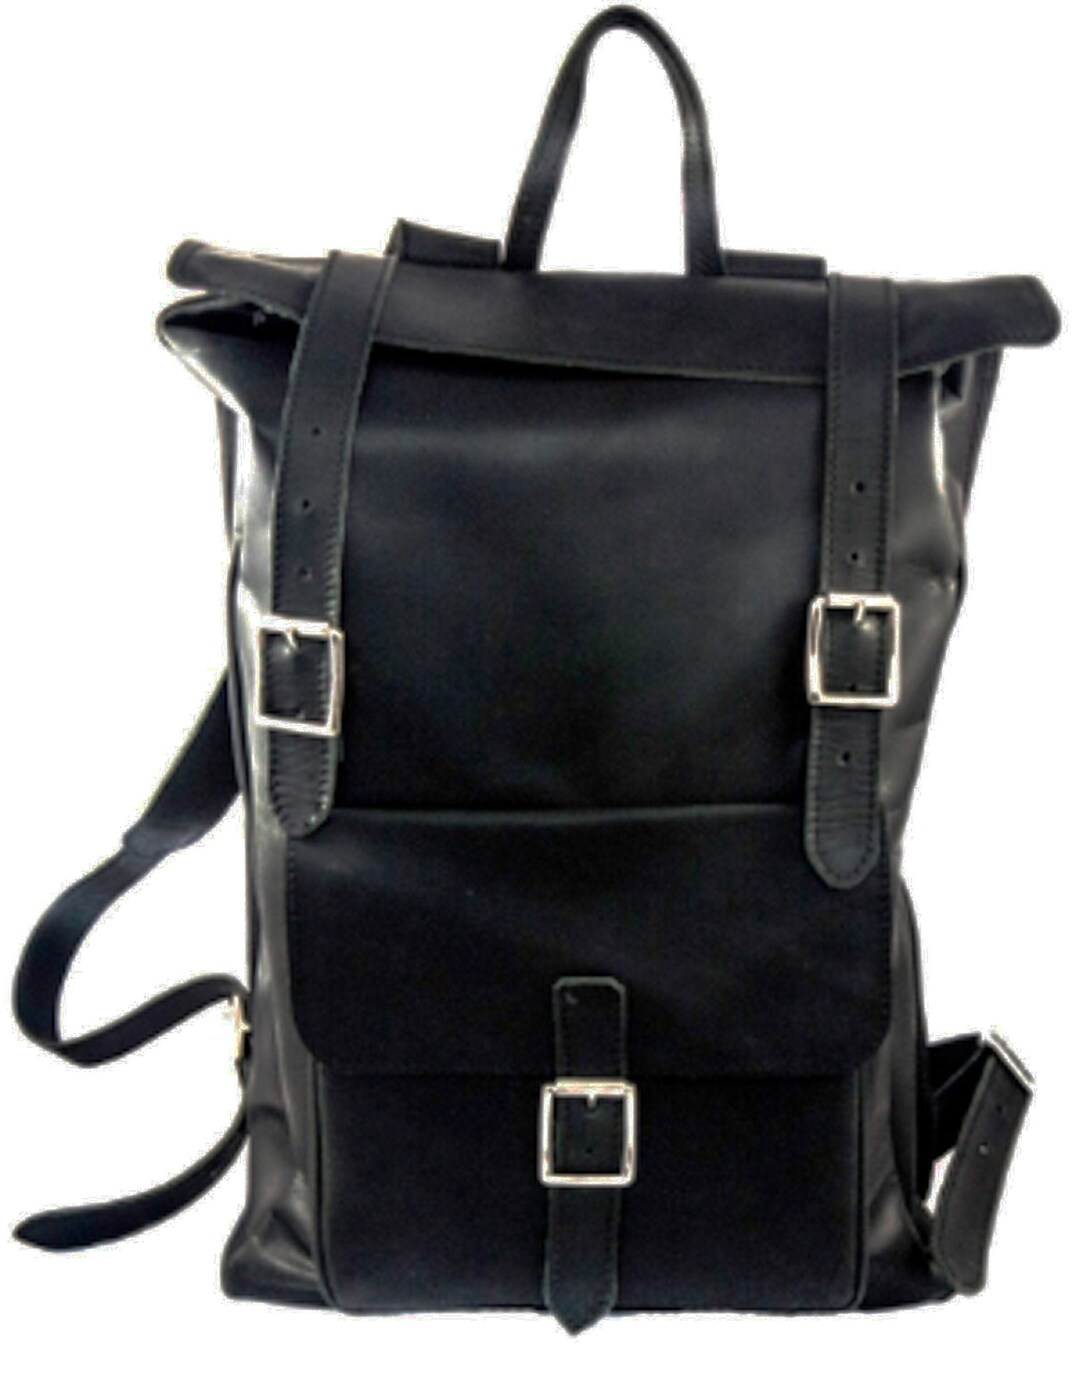 The Stylish Outdoor Weekend Biker Leather Backpack - Etsy